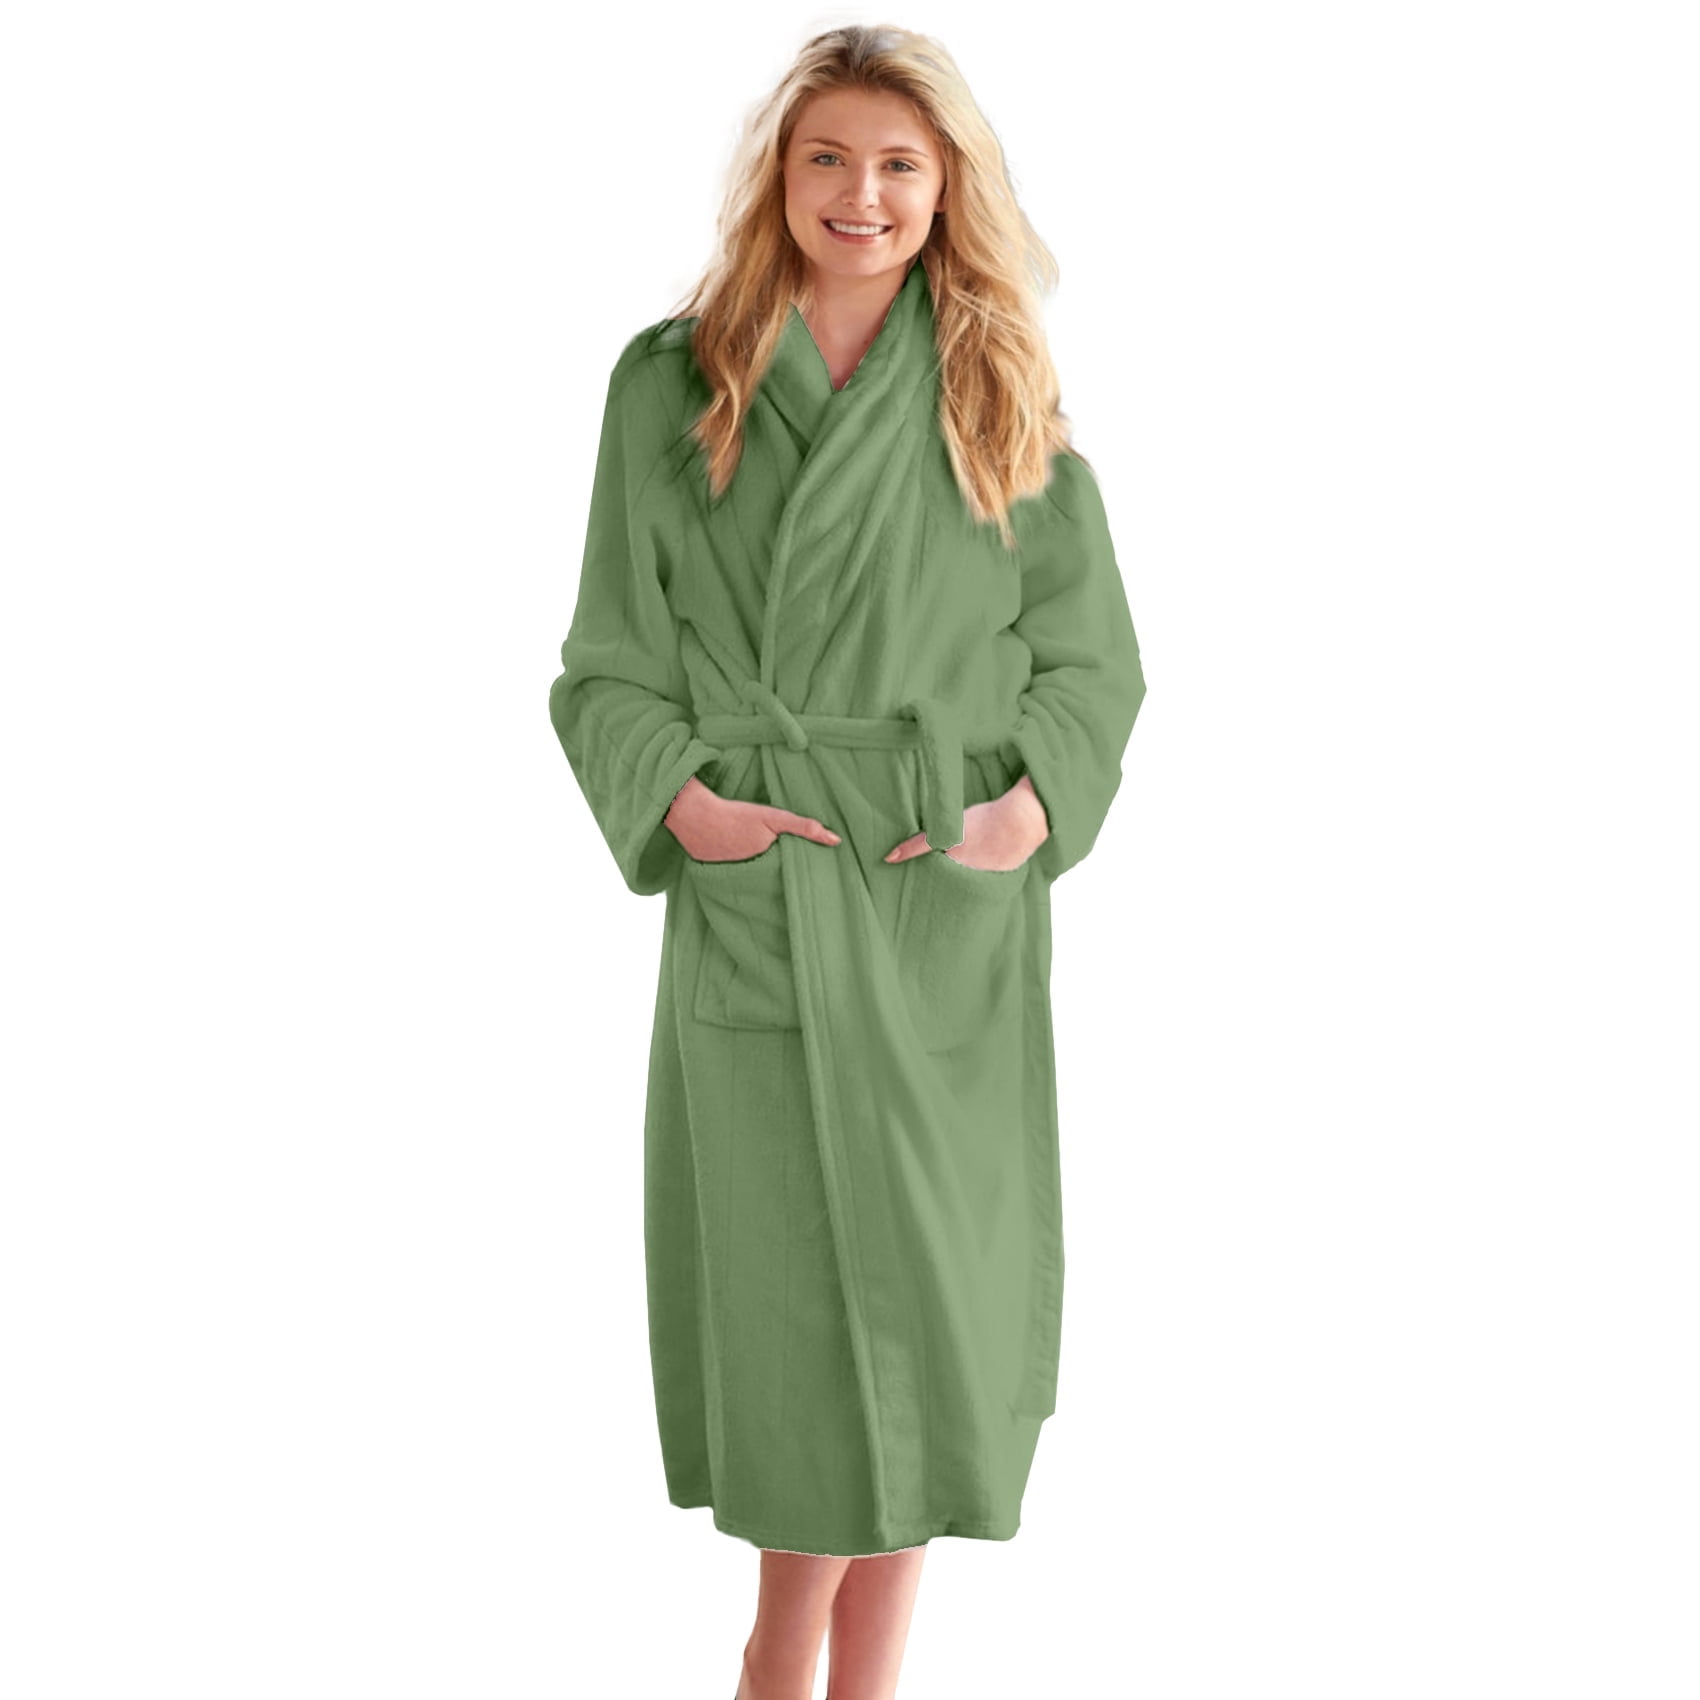 DAN RIVER Terry Cloth Robes for Women and Men - Lightweight 100% Cotton  Bathrobe - Unisex Plush Robe Perfect for Spa, Sauna, Shower or at Home  [Purple]